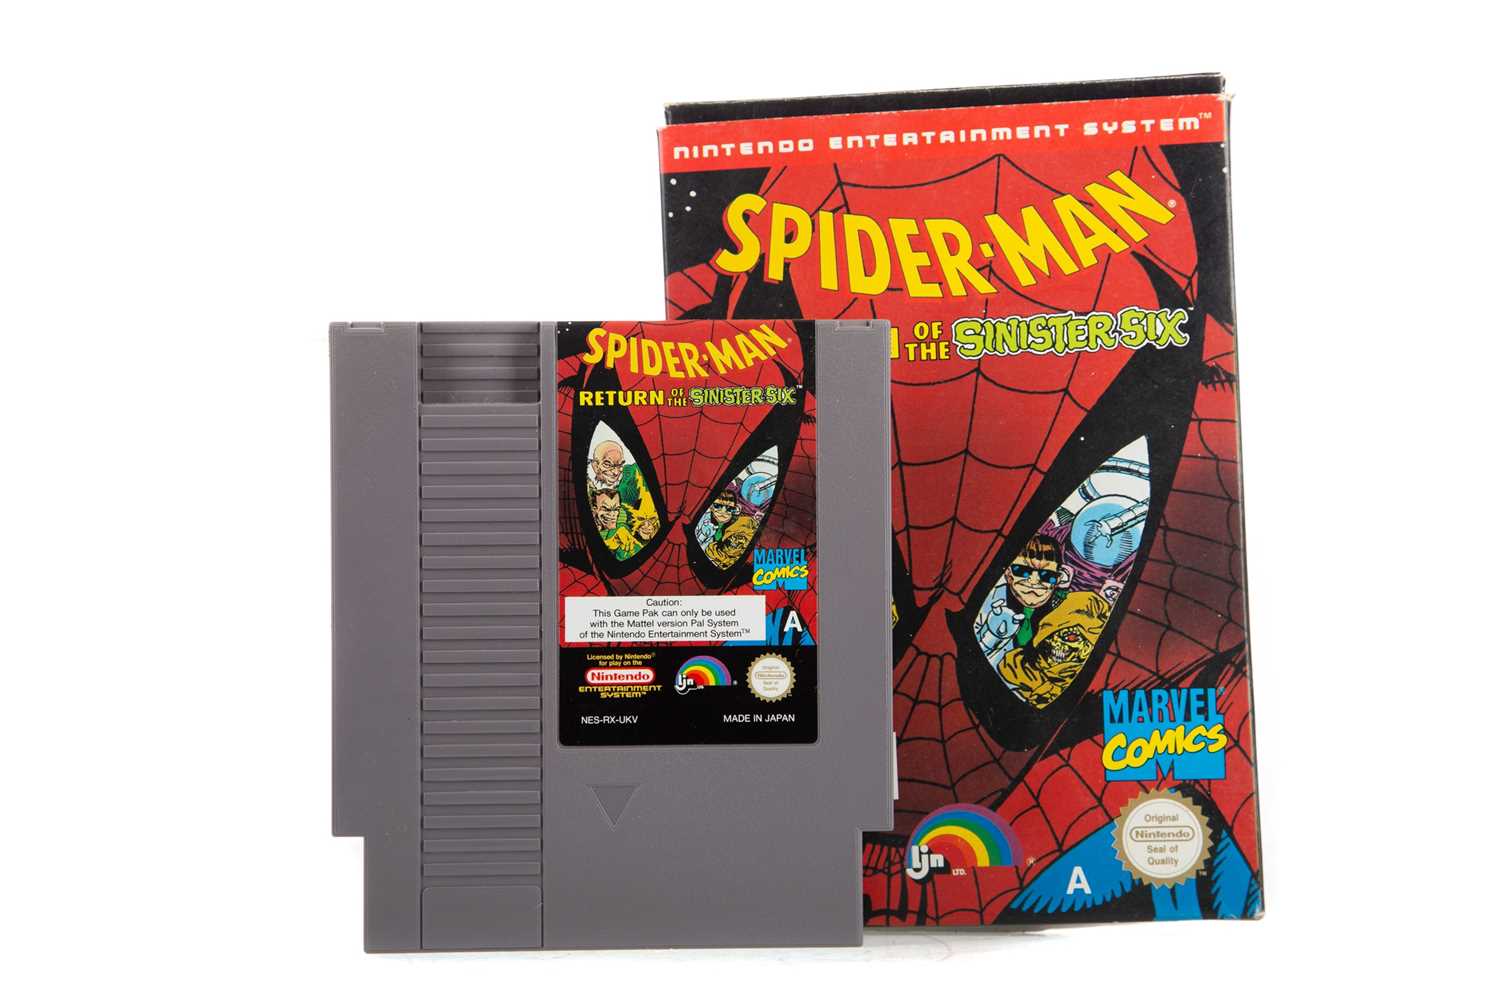 SPIDER-MAN RETURN OF THE SINISTER SIX FOR THE NINTENDO ENTERTAINMENT SYSTEM